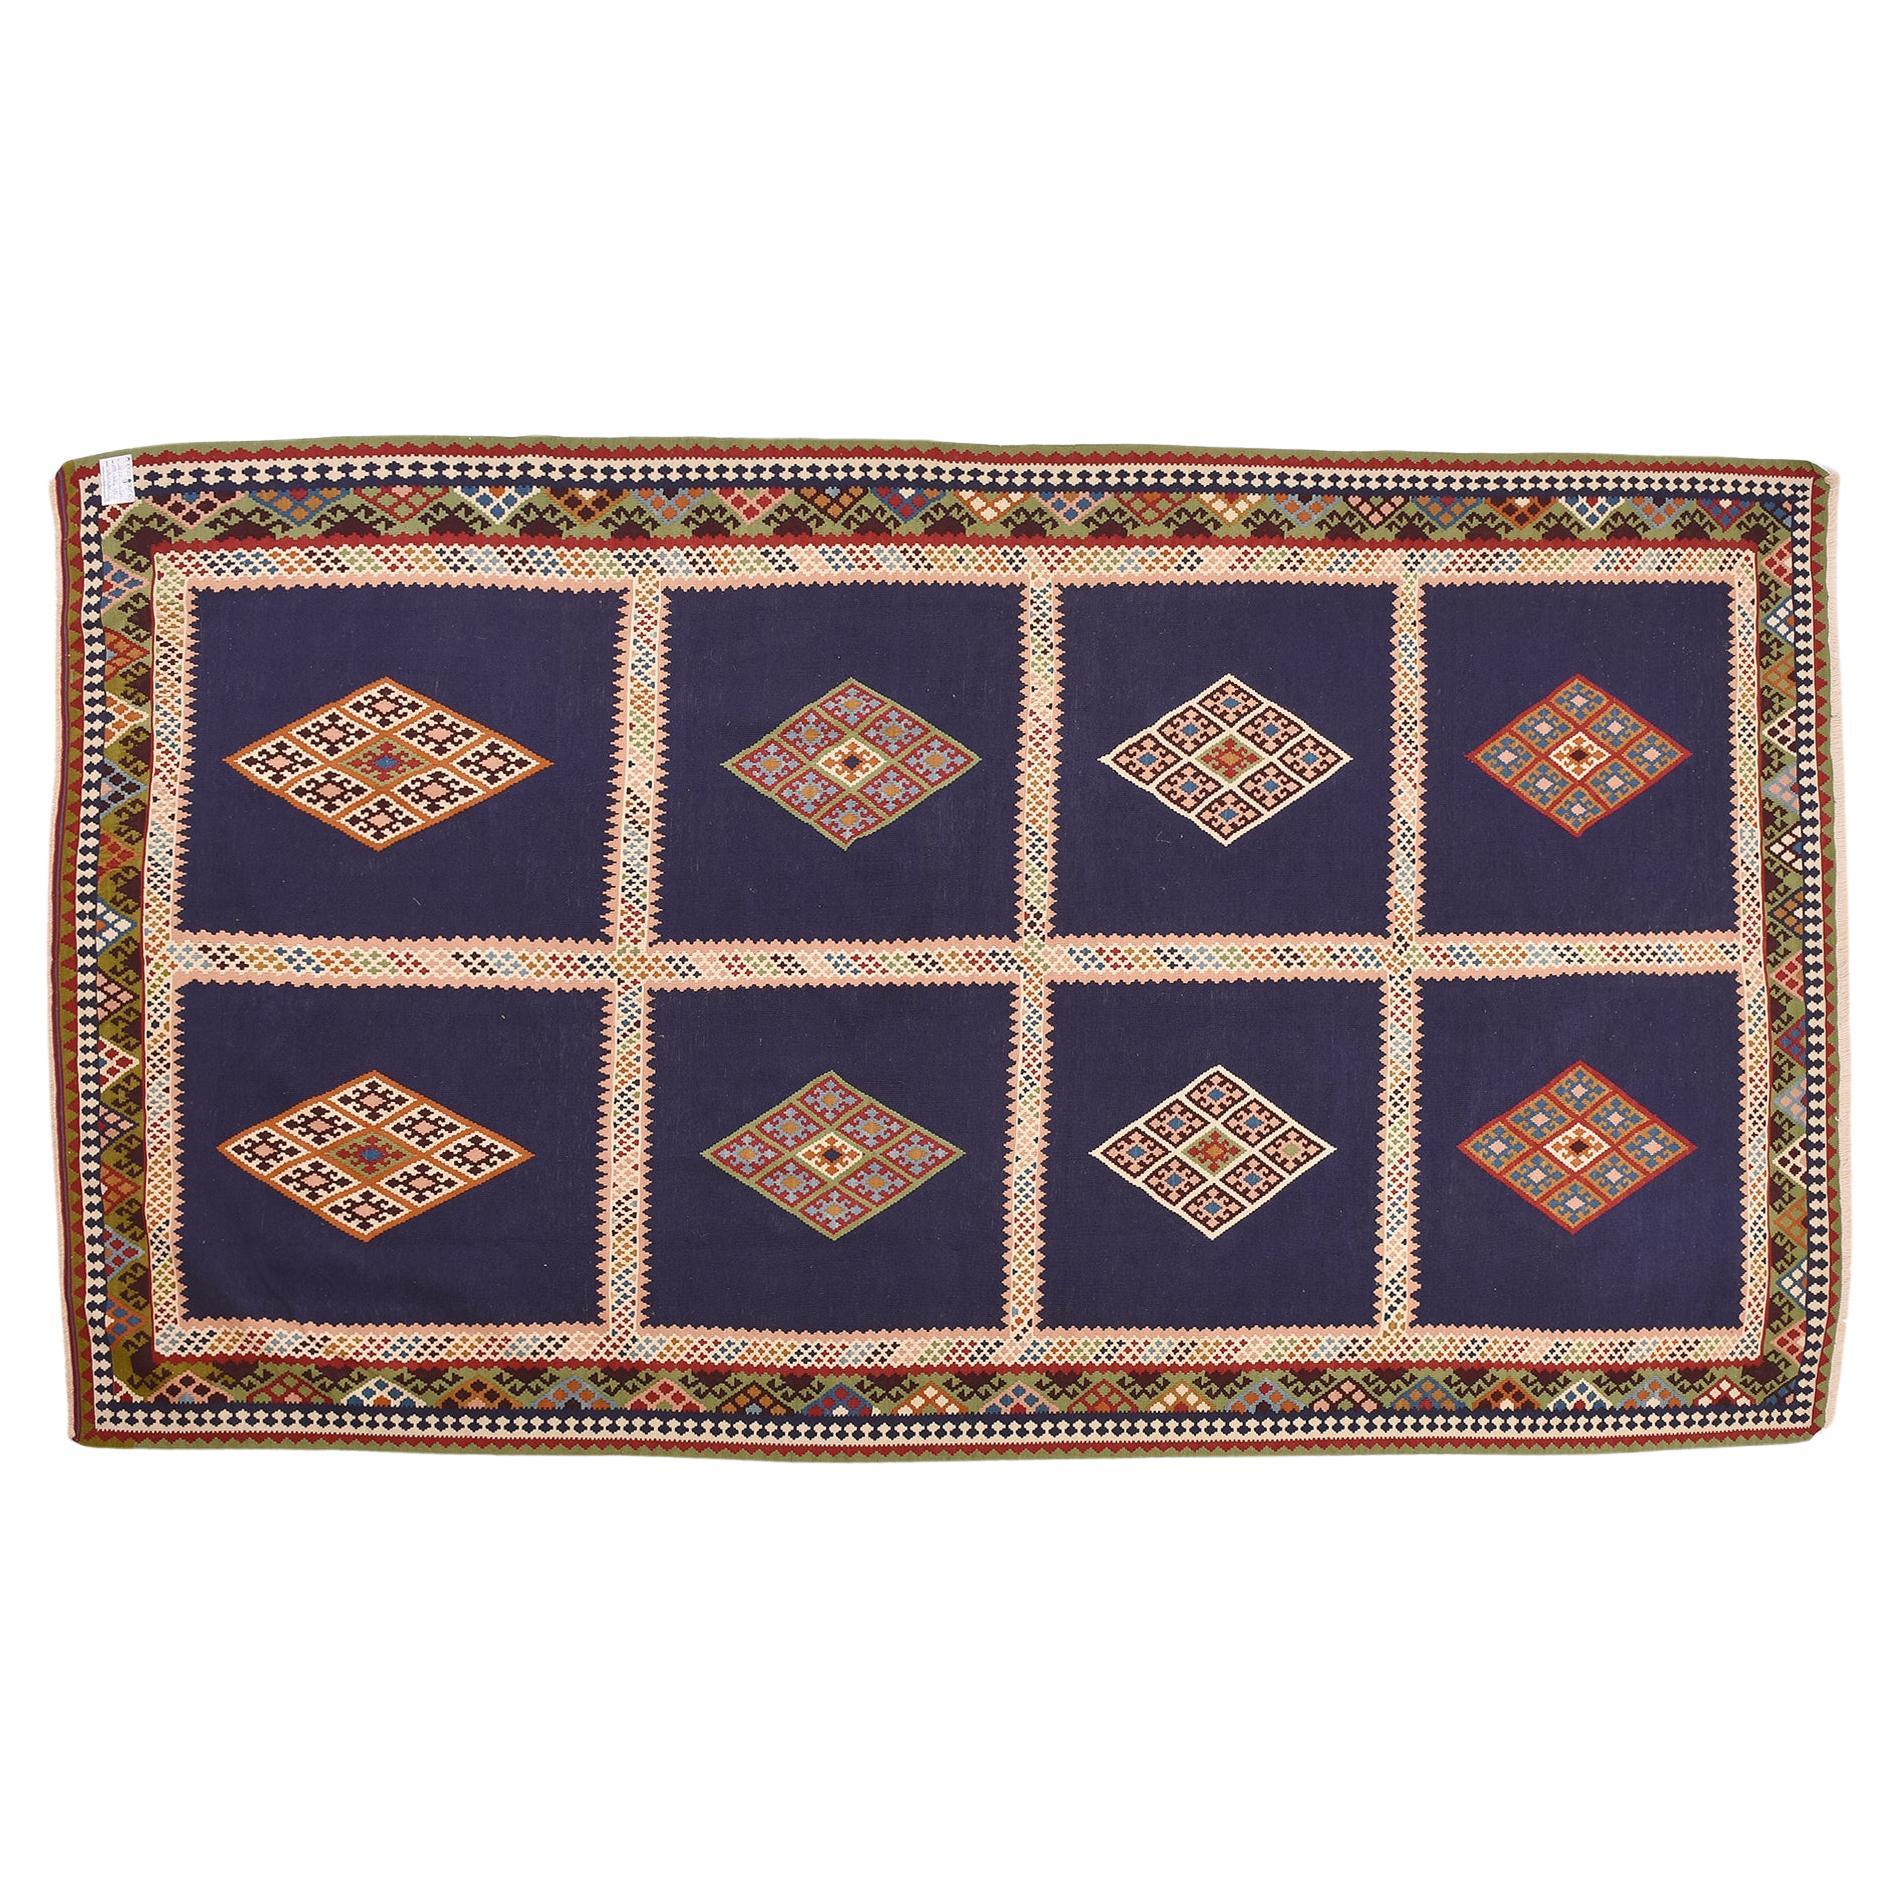 nr. 1016 - Perfect polychrome rhombuses on a blue background for this beautiful perfect kilim.  The rich frame has shades of green, a rare color to find in nomadic carpets.  Dense and accurate workmanship.
Perfect for a living room.